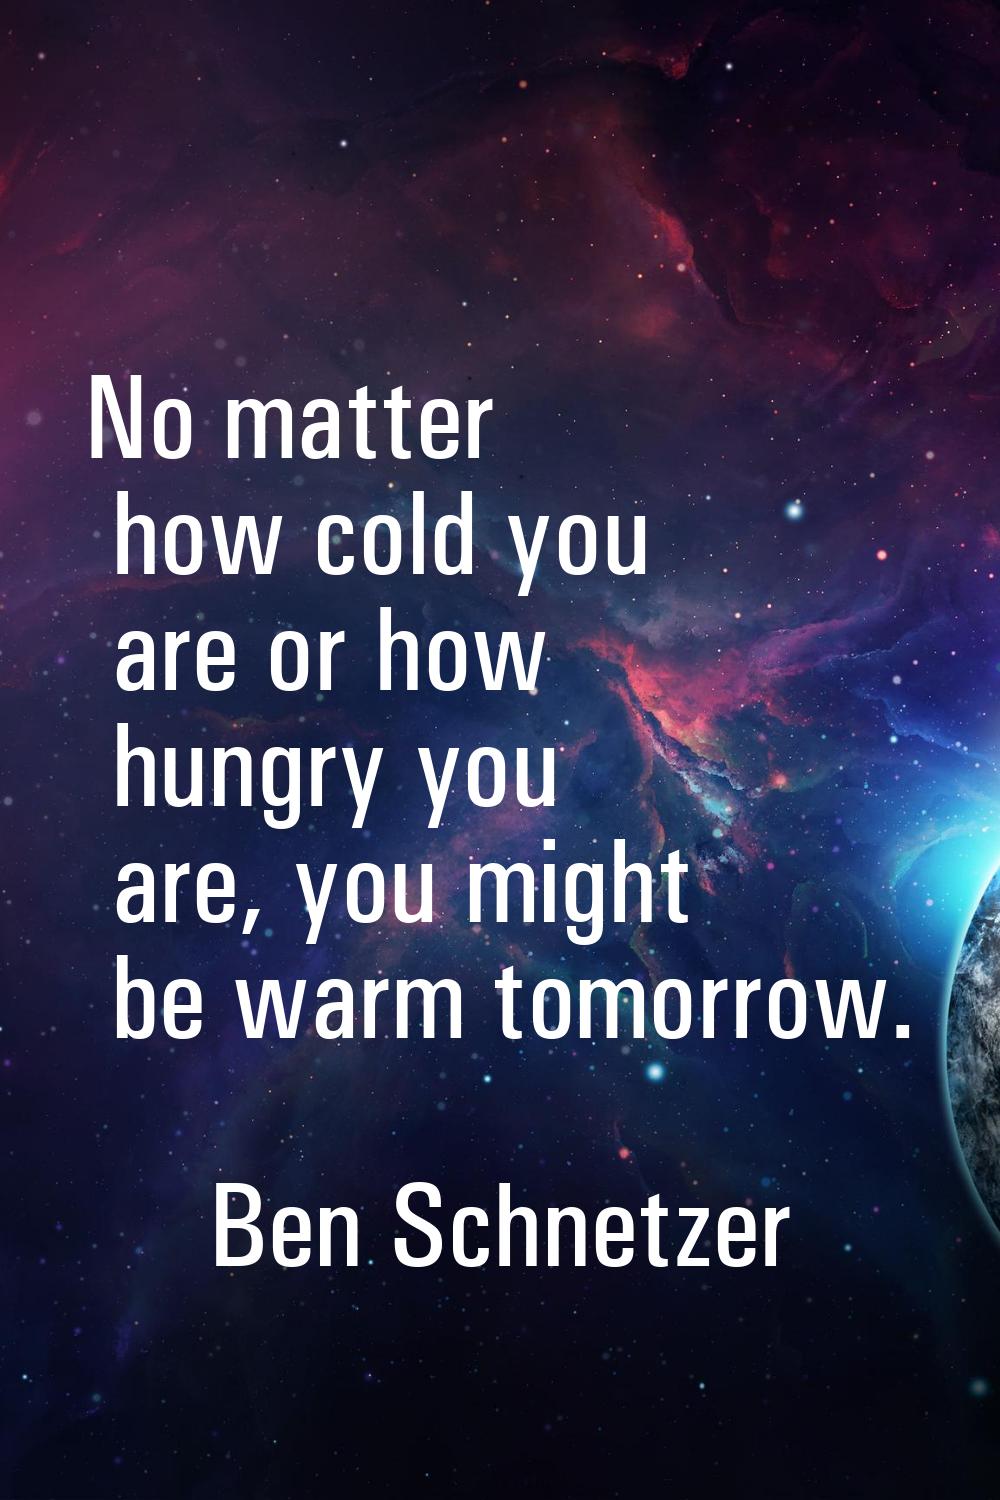 No matter how cold you are or how hungry you are, you might be warm tomorrow.